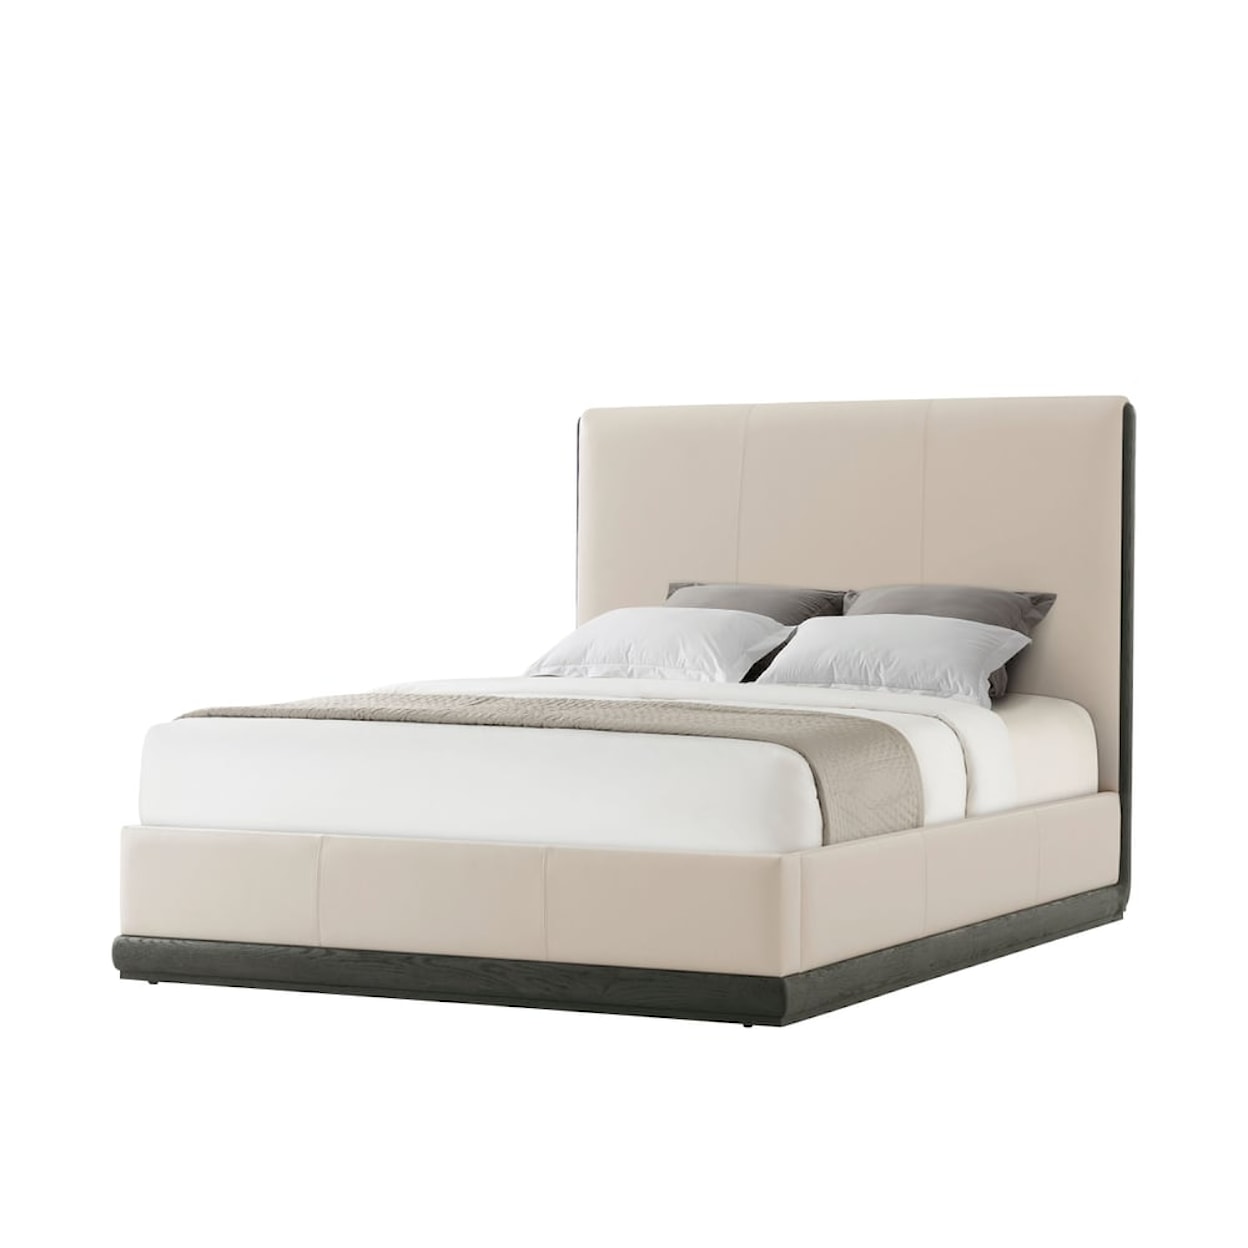 Theodore Alexander Repose Repose Upholstered US Queen Bed